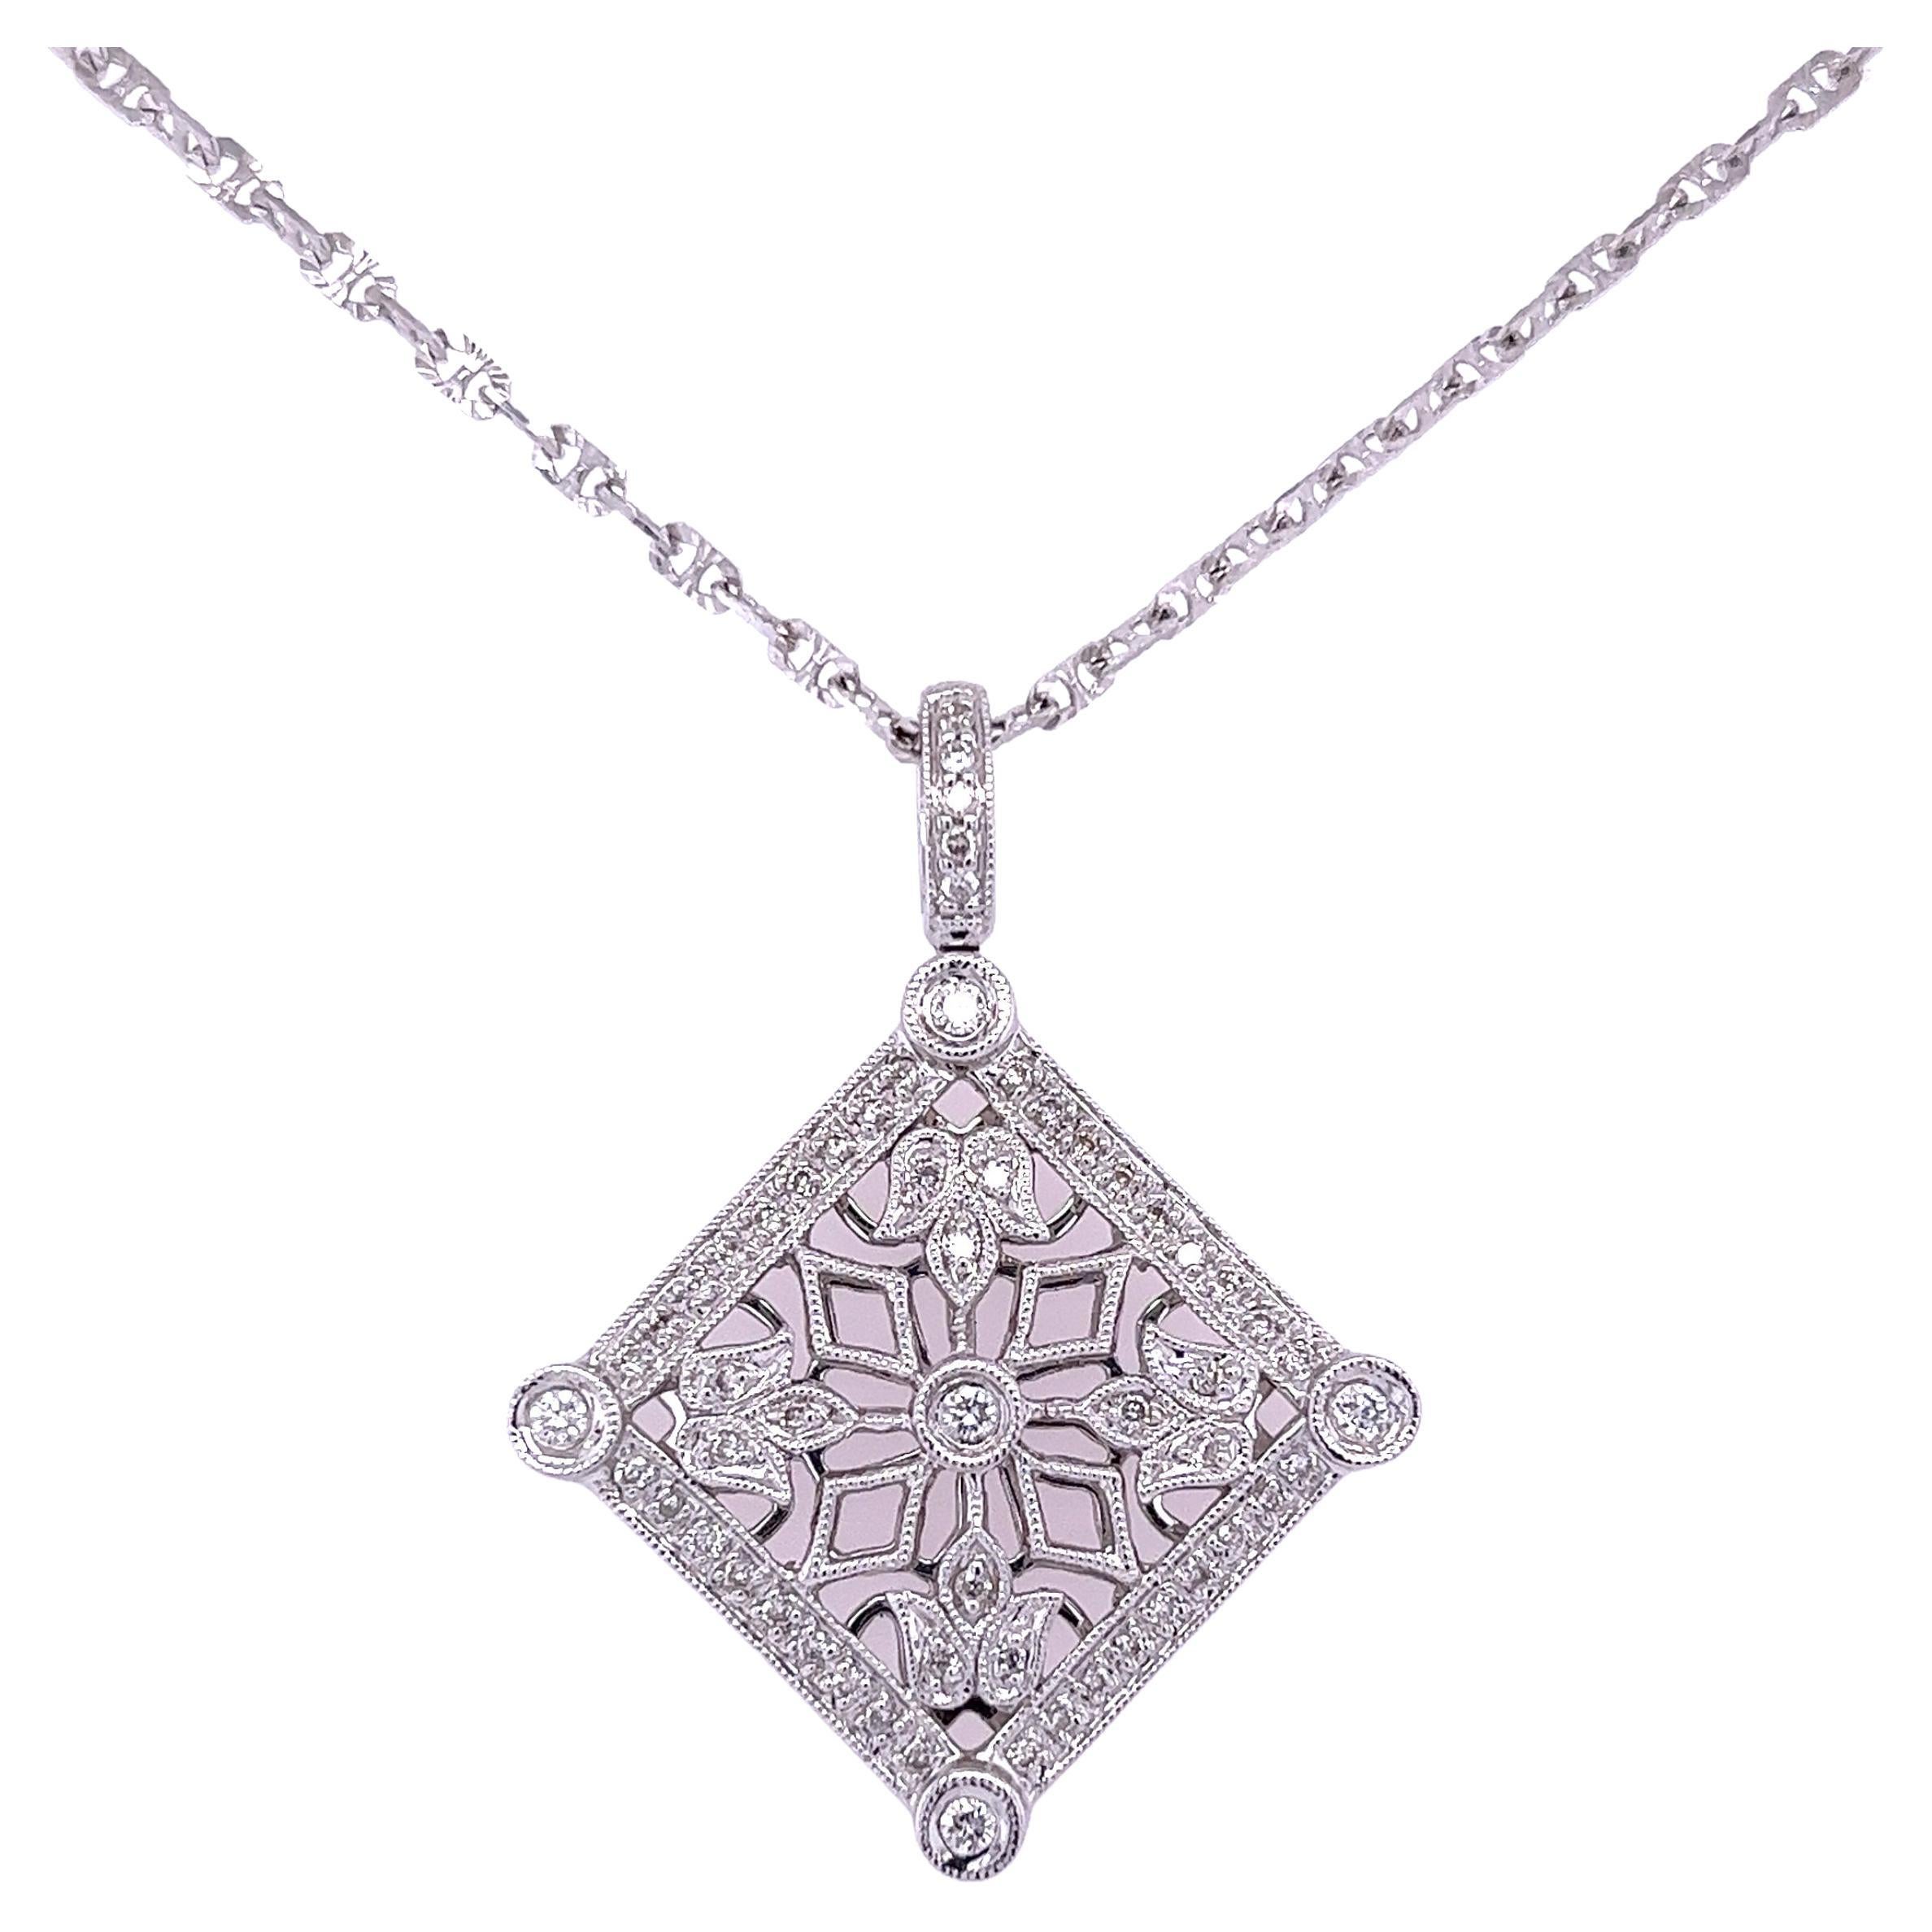 18 karat white gold sets 58 round cut natural diamonds in this Art Deco-inspired pendant. This pendant features the signature Art Deco style with a symmetrical floral pattern motif. Hypoallergenic and 100% waterproof. Ideal for daily wear. 

The